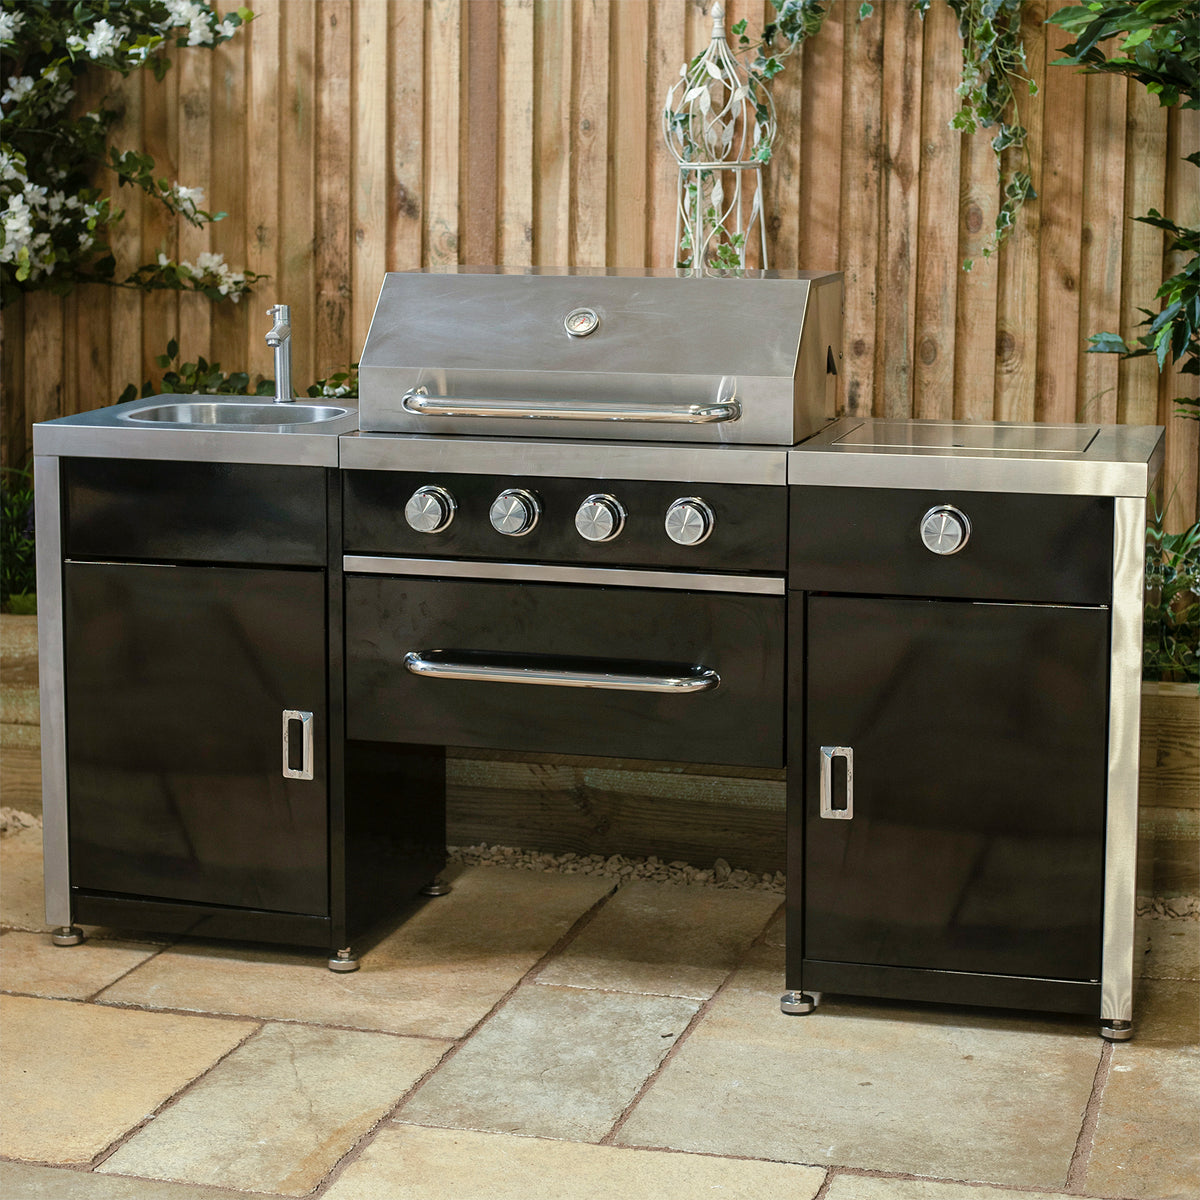 Draco Grills Black 4 Burner Gas Barbecue Outdoor Kitchen Island with Sink and Side Burner